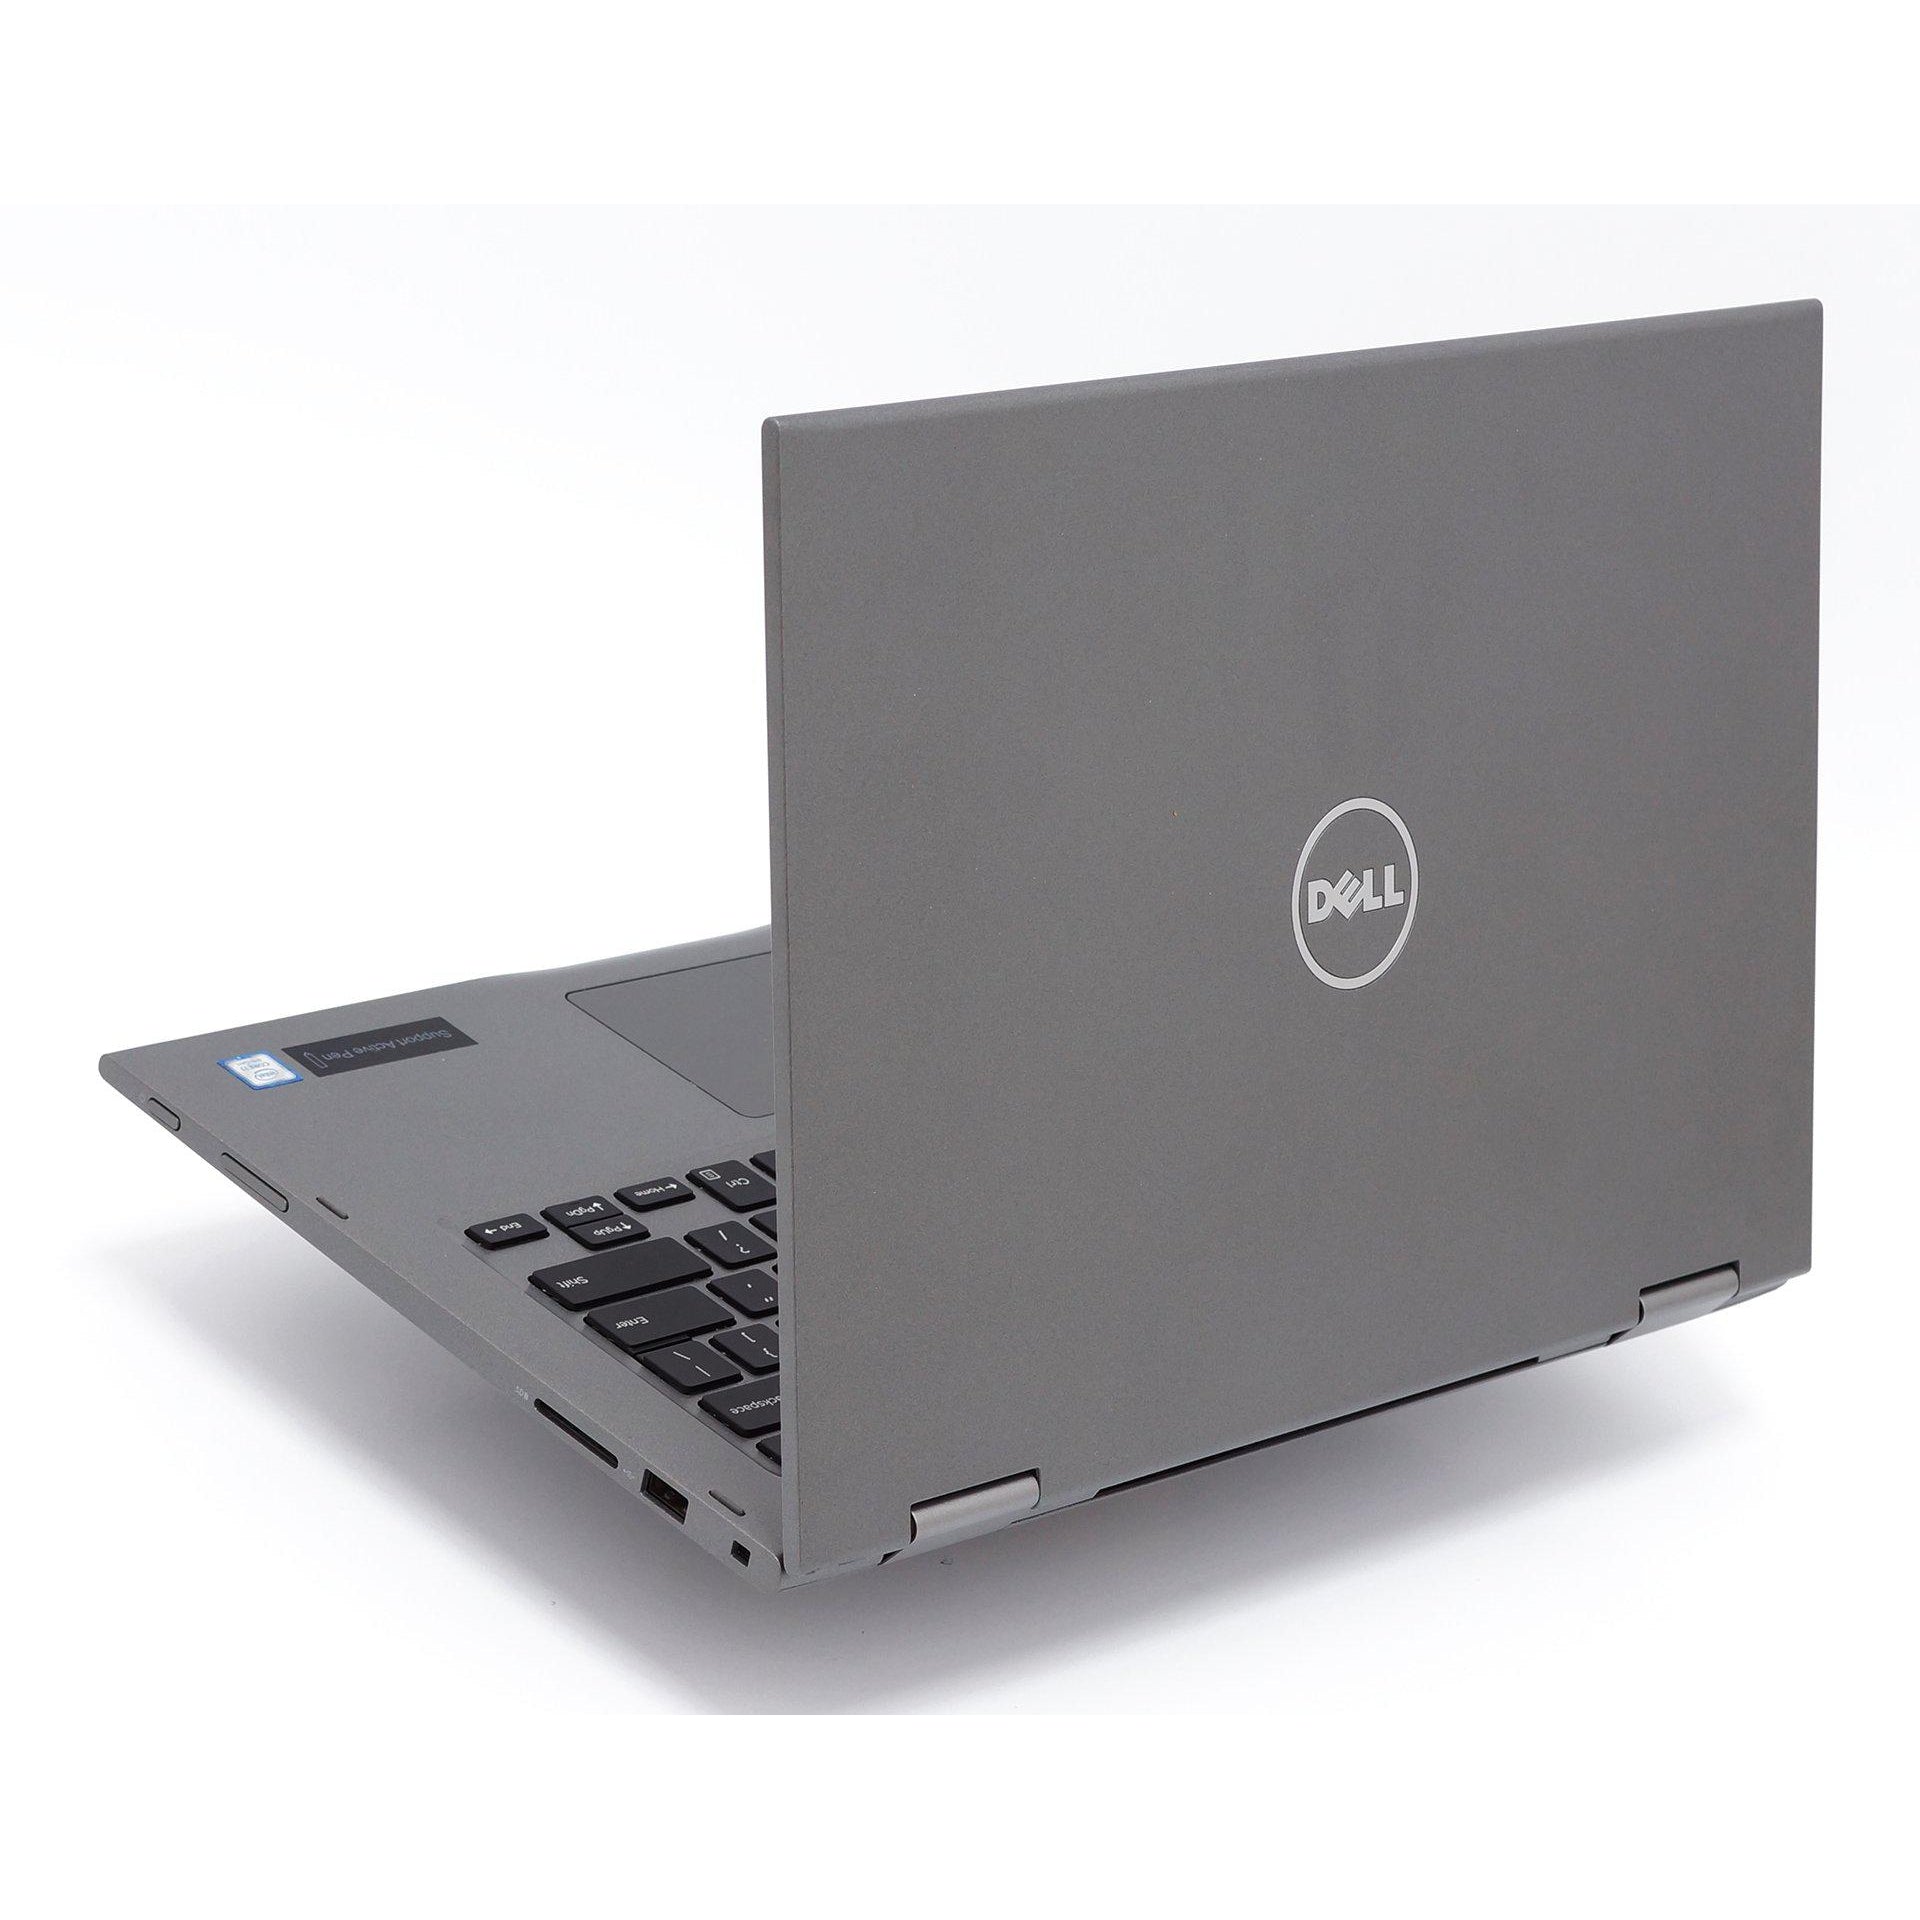 Dell Inspiron 13 5379, 13.3" Laptop, Intel Core i5, 8GB RAM, 256GB SSD, Grey - Refurbished Excellent